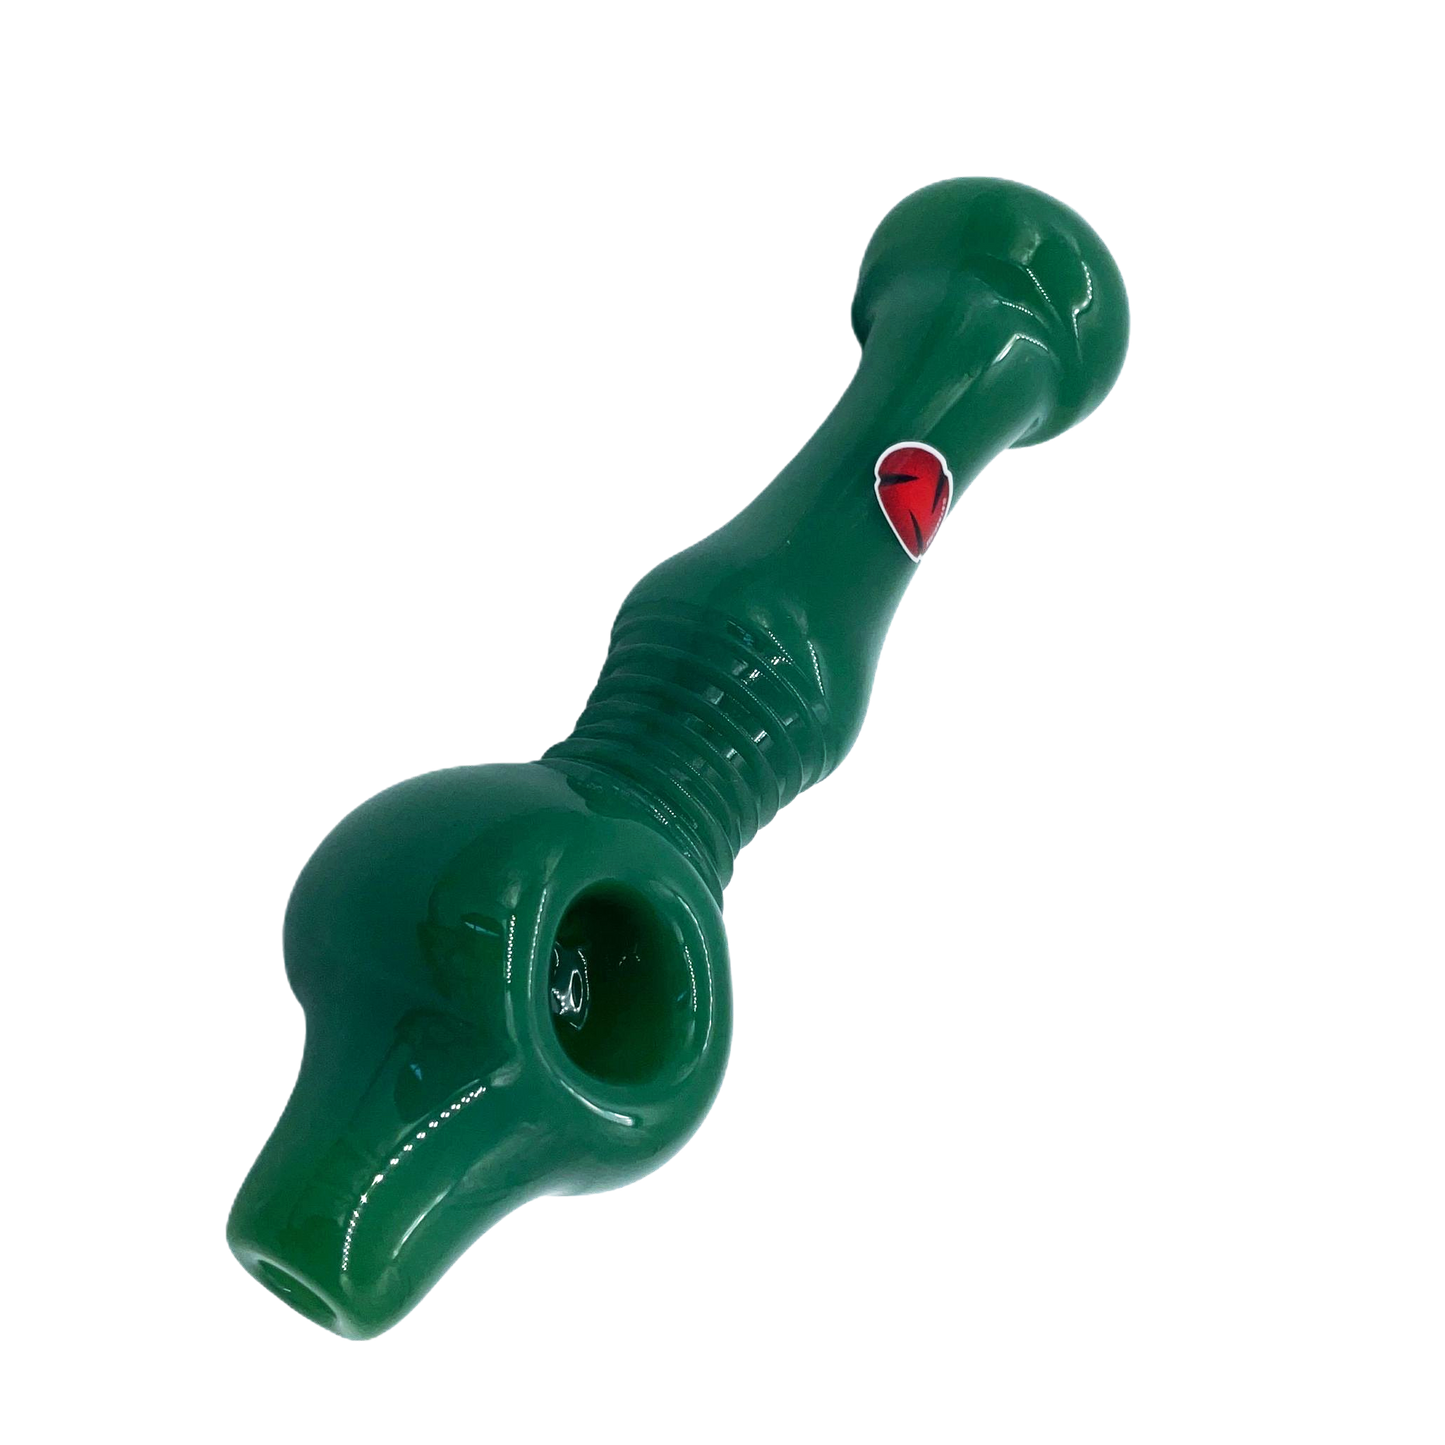 STR8 GLASS - Hand Pipe - Assorted Colors